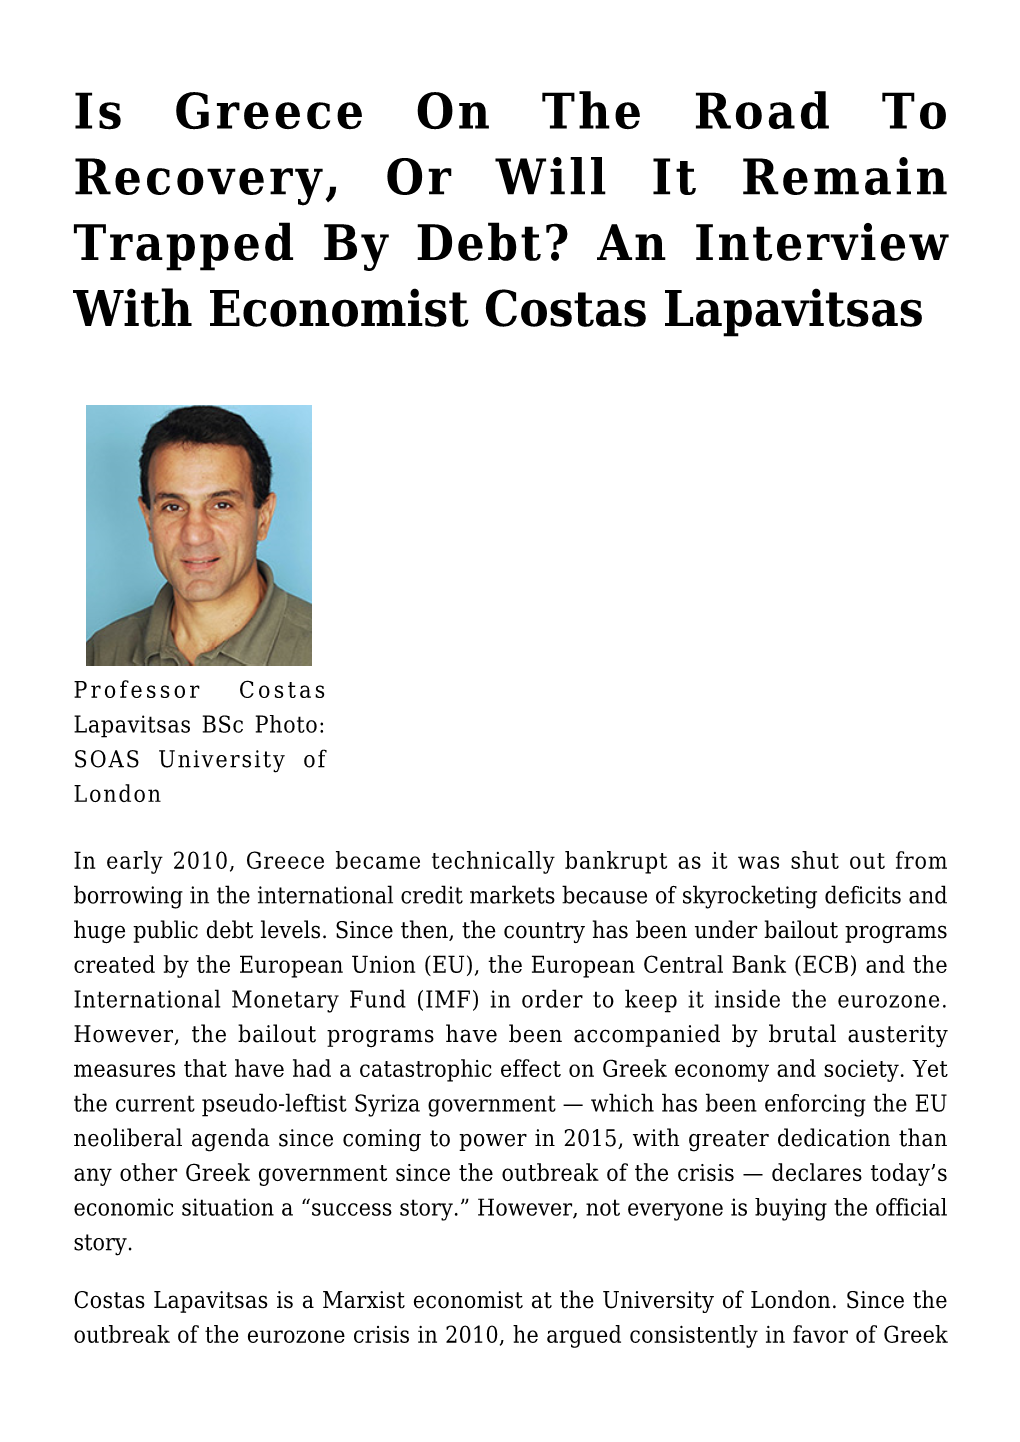 Is Greece on the Road to Recovery, Or Will It Remain Trapped by Debt? an Interview with Economist Costas Lapavitsas